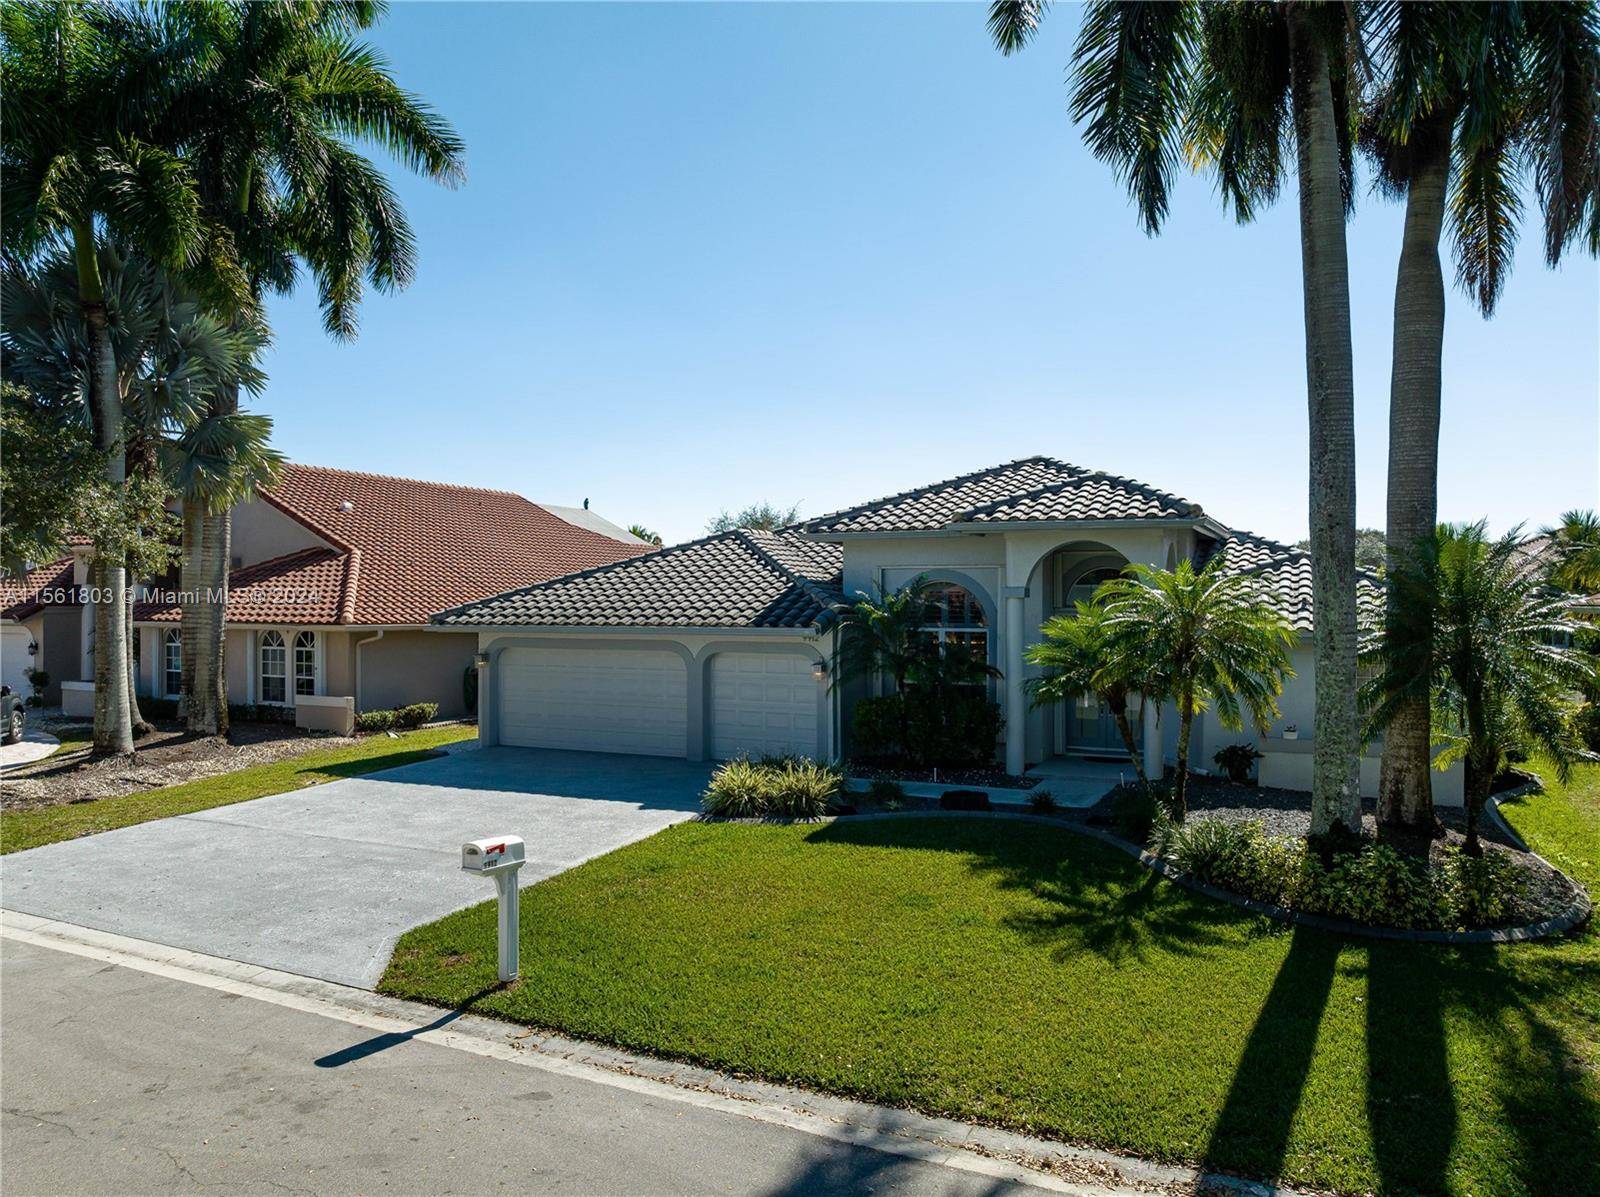 This charming and spacious home is located in a highly sought after neighborhood in Coral Springs.